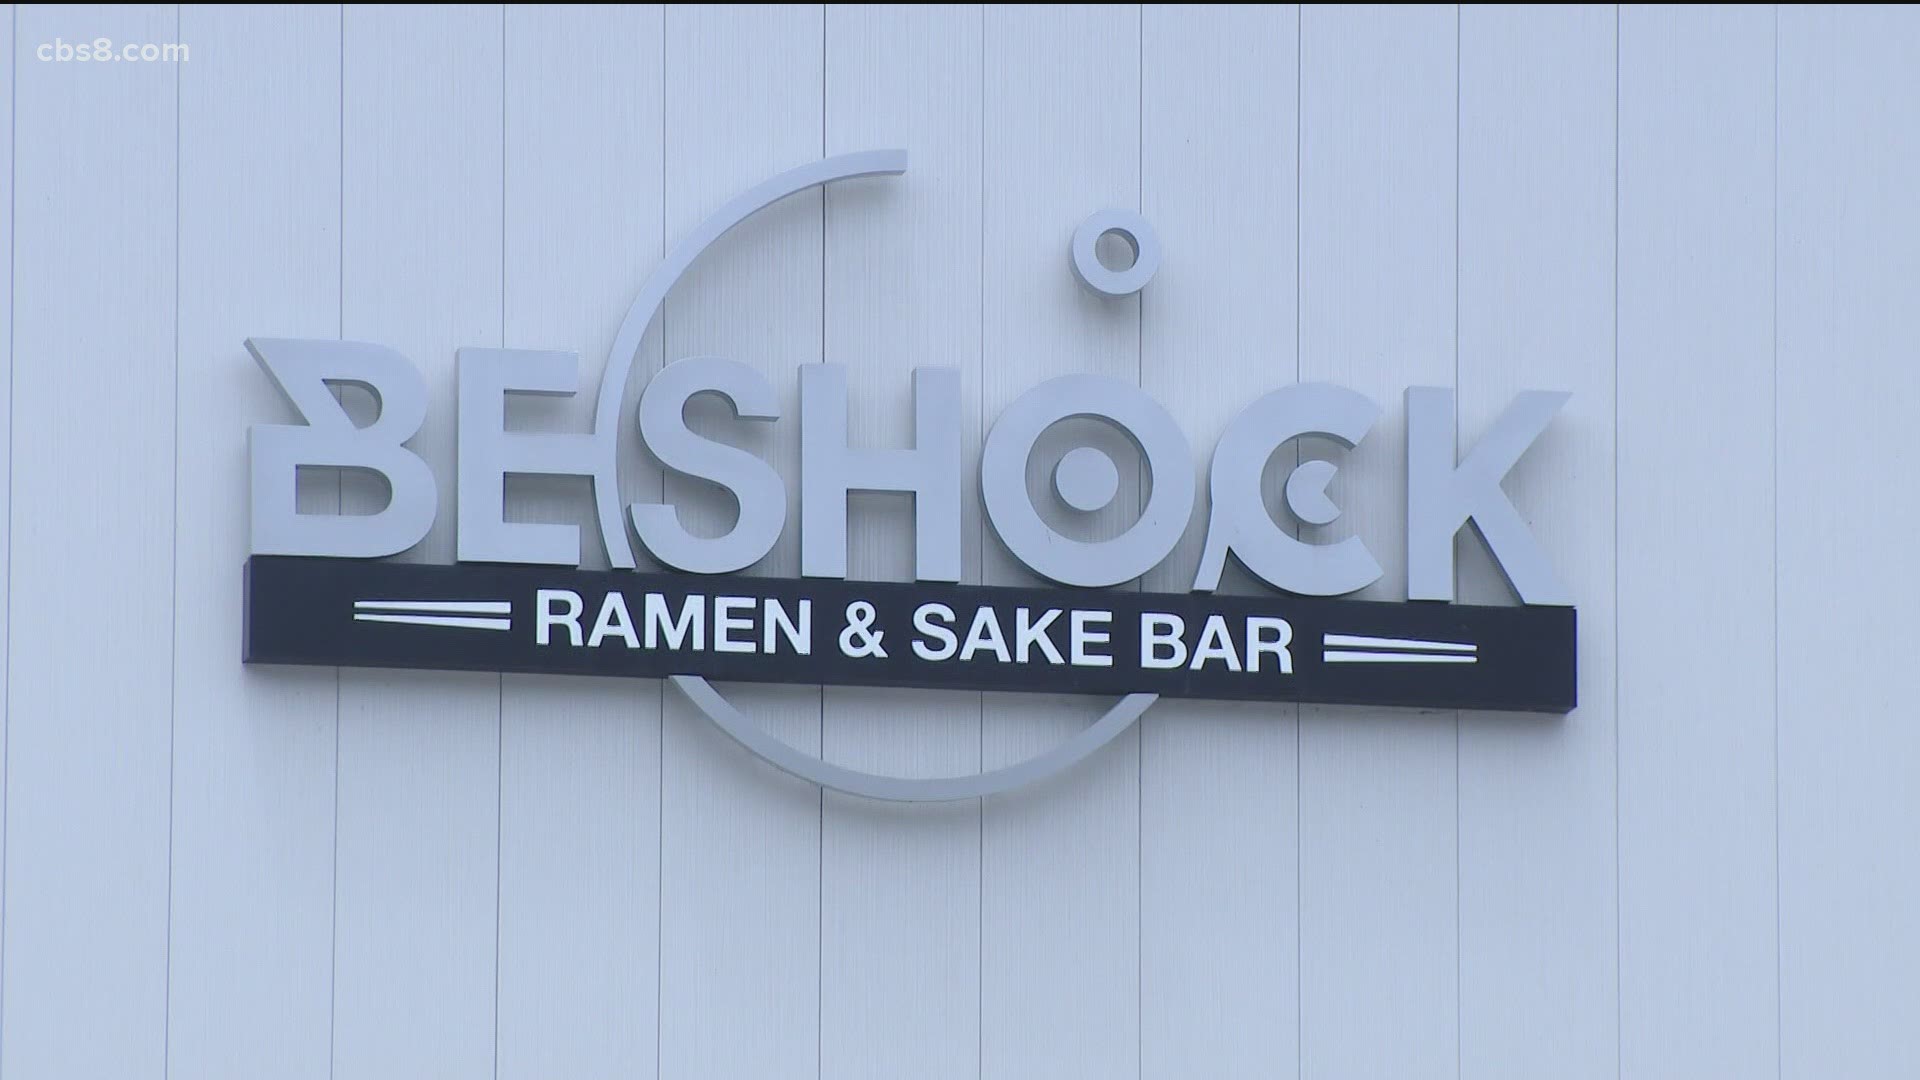 This new concept ramen restaurant has 2 locations in San Diego and has roots in Japan.  Find out more at beshock.com